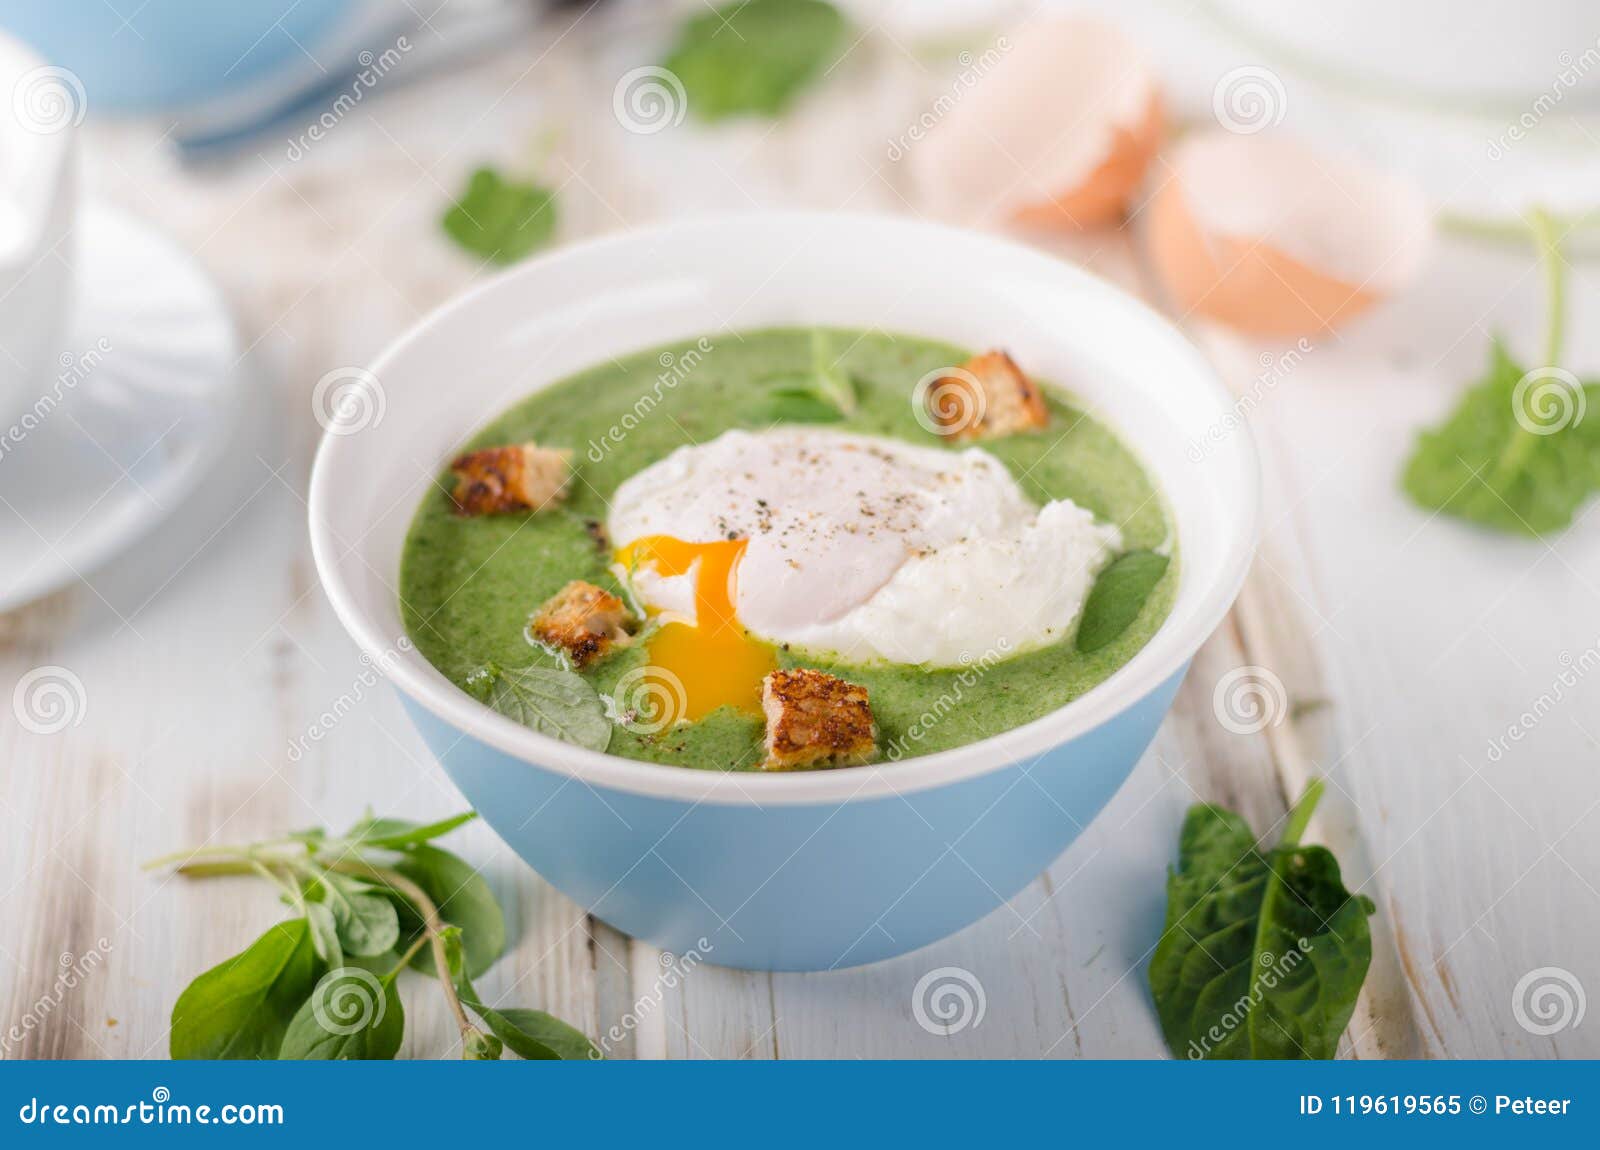 Spinach Soup With Poached Egg Stock Image - Image of lunch ...